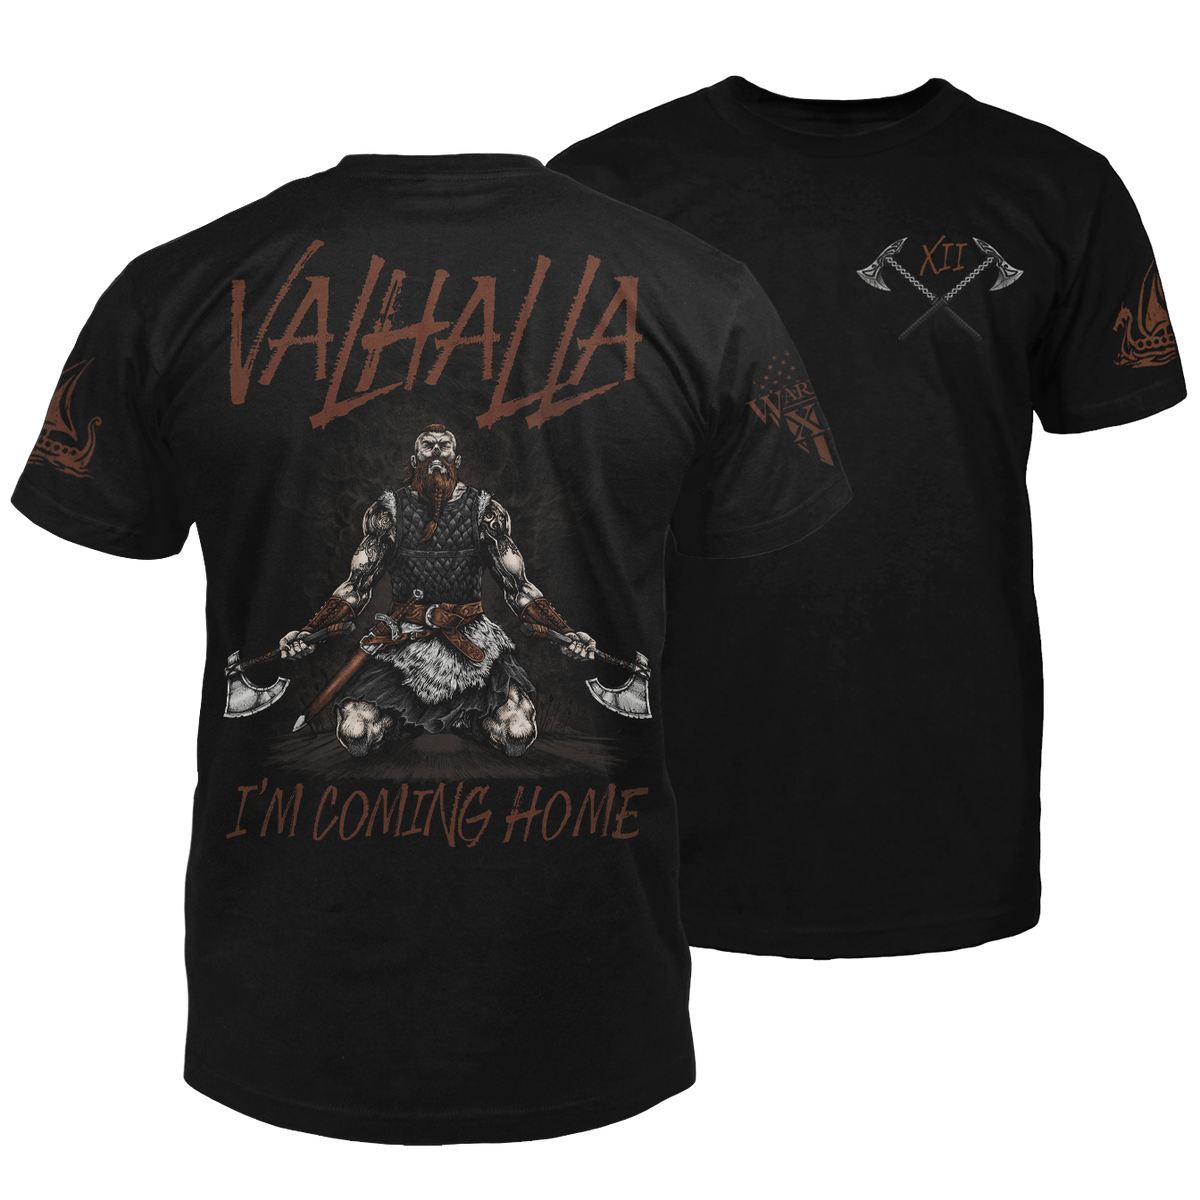 The front and back of a black t-shirt. The back features a viking warrior on his knees, looking up at the sky, with an axe in each hand with the words "Valhalla I'm coming home." The front has a small pocket image of two crossed axes.